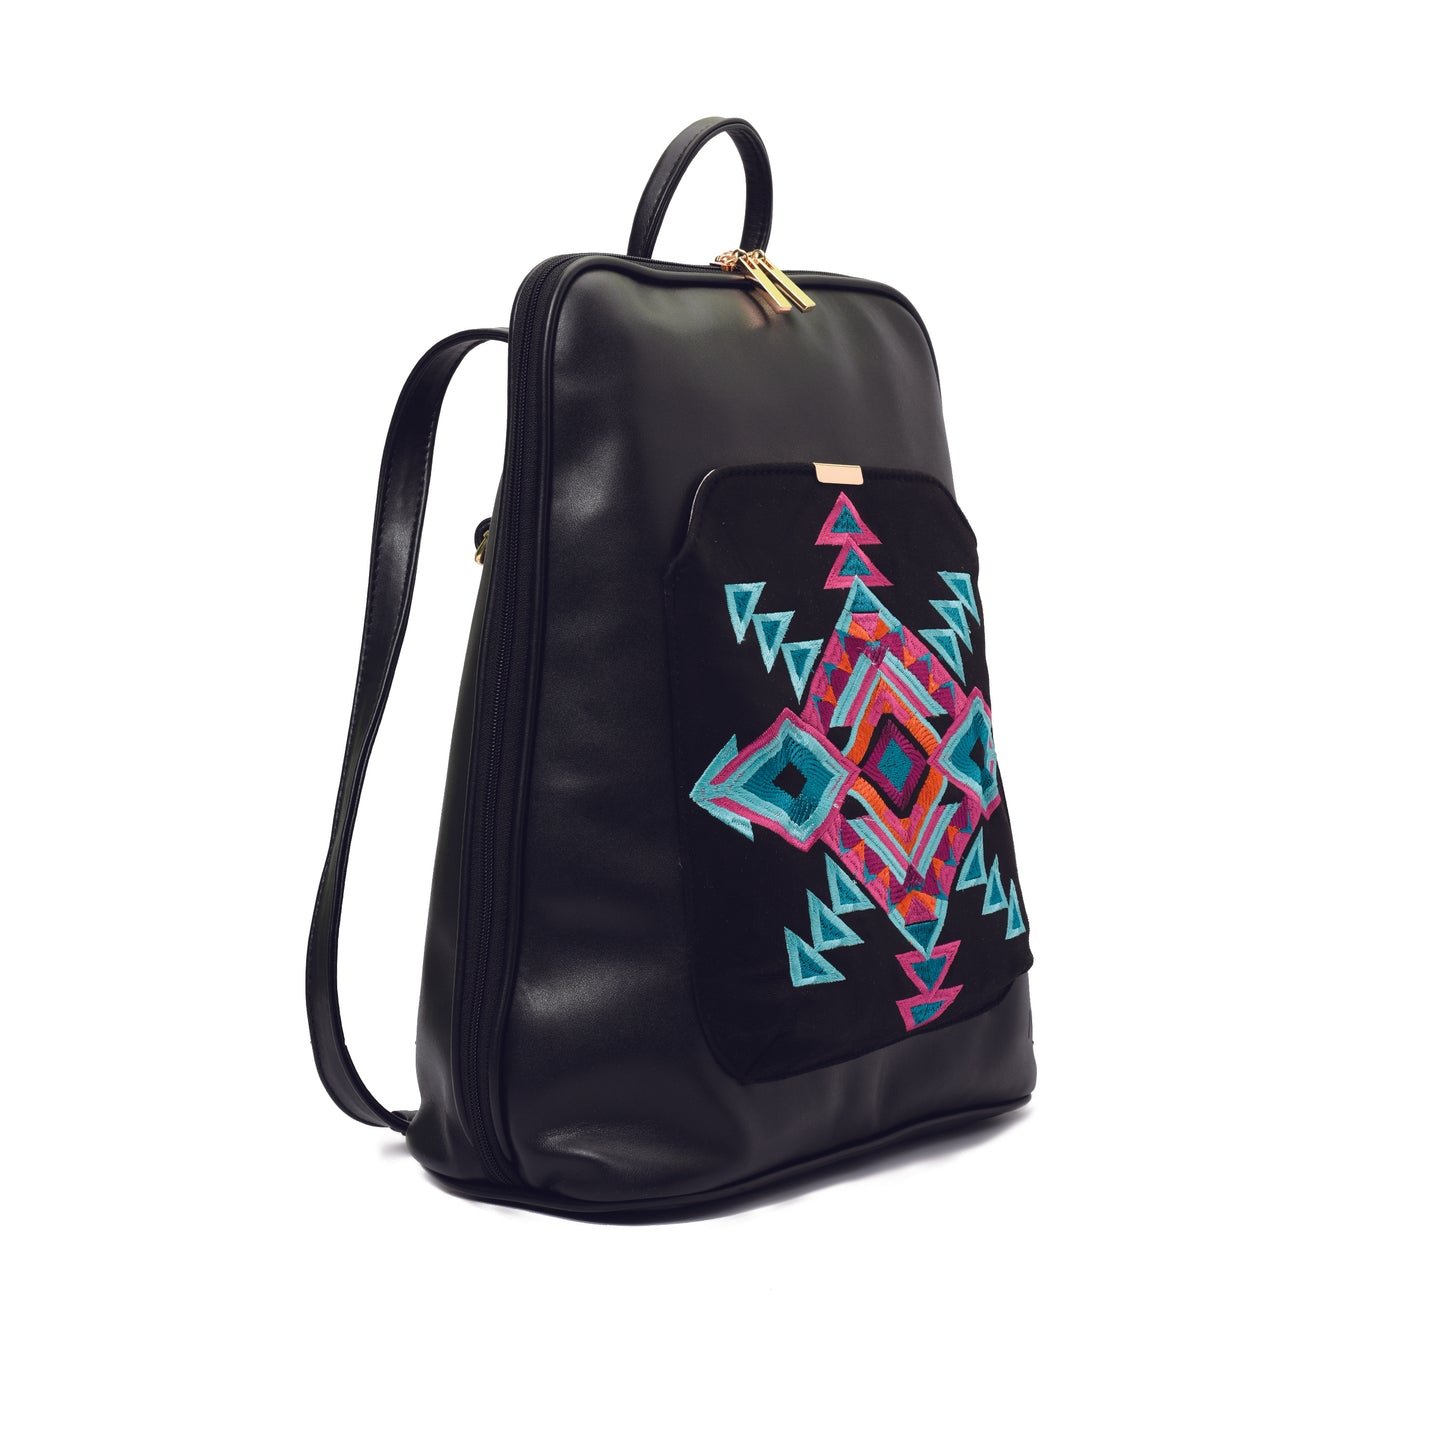 Laptop Black with Black embroideries fabric Backpack/Cross - Code 2010